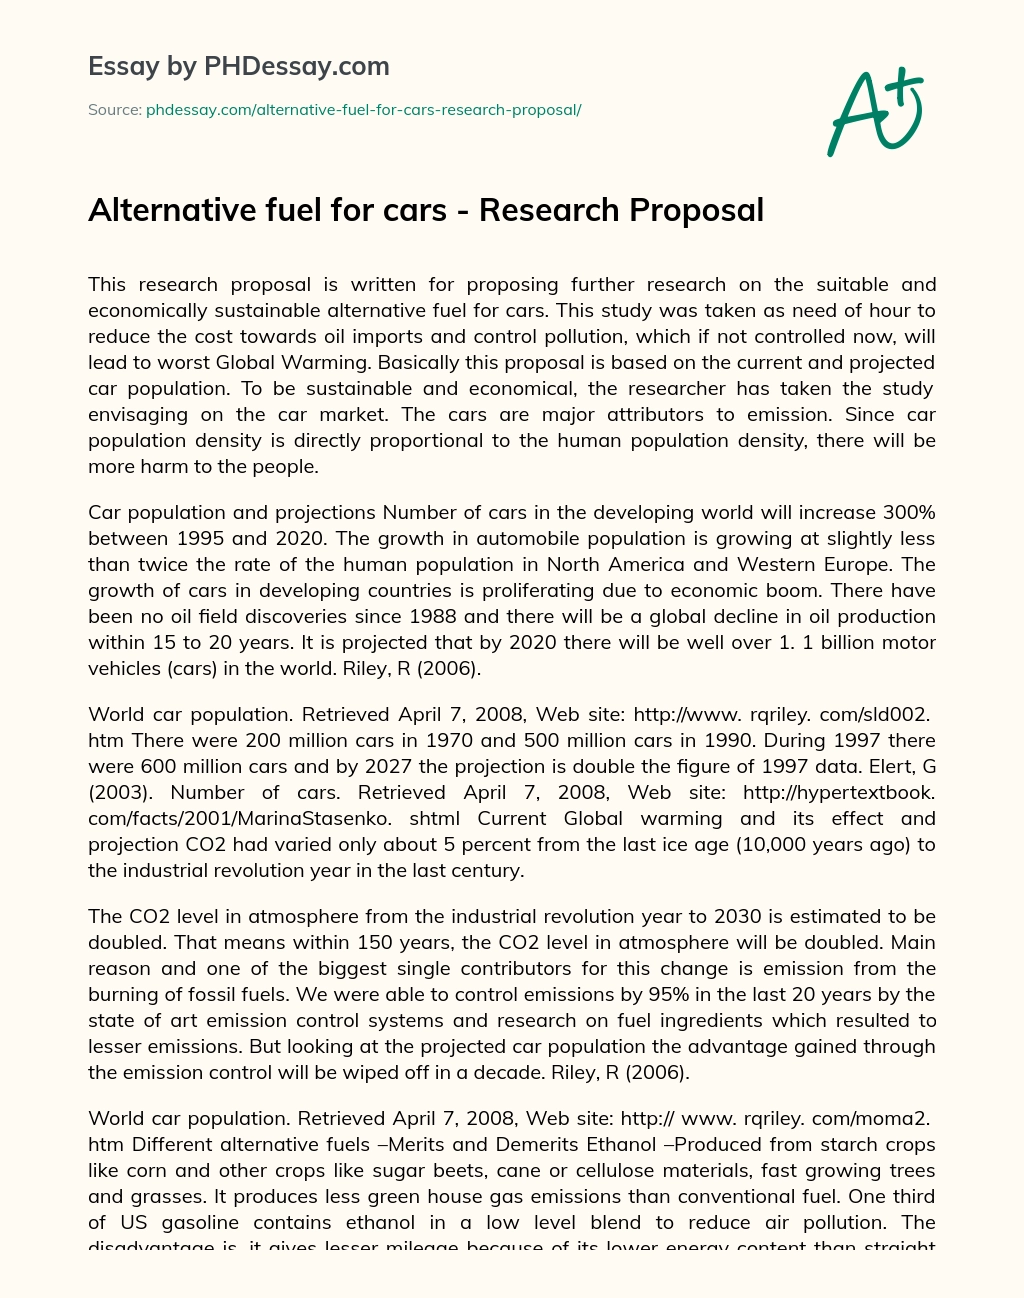 Alternative Fuel for Cars – Research Proposal essay